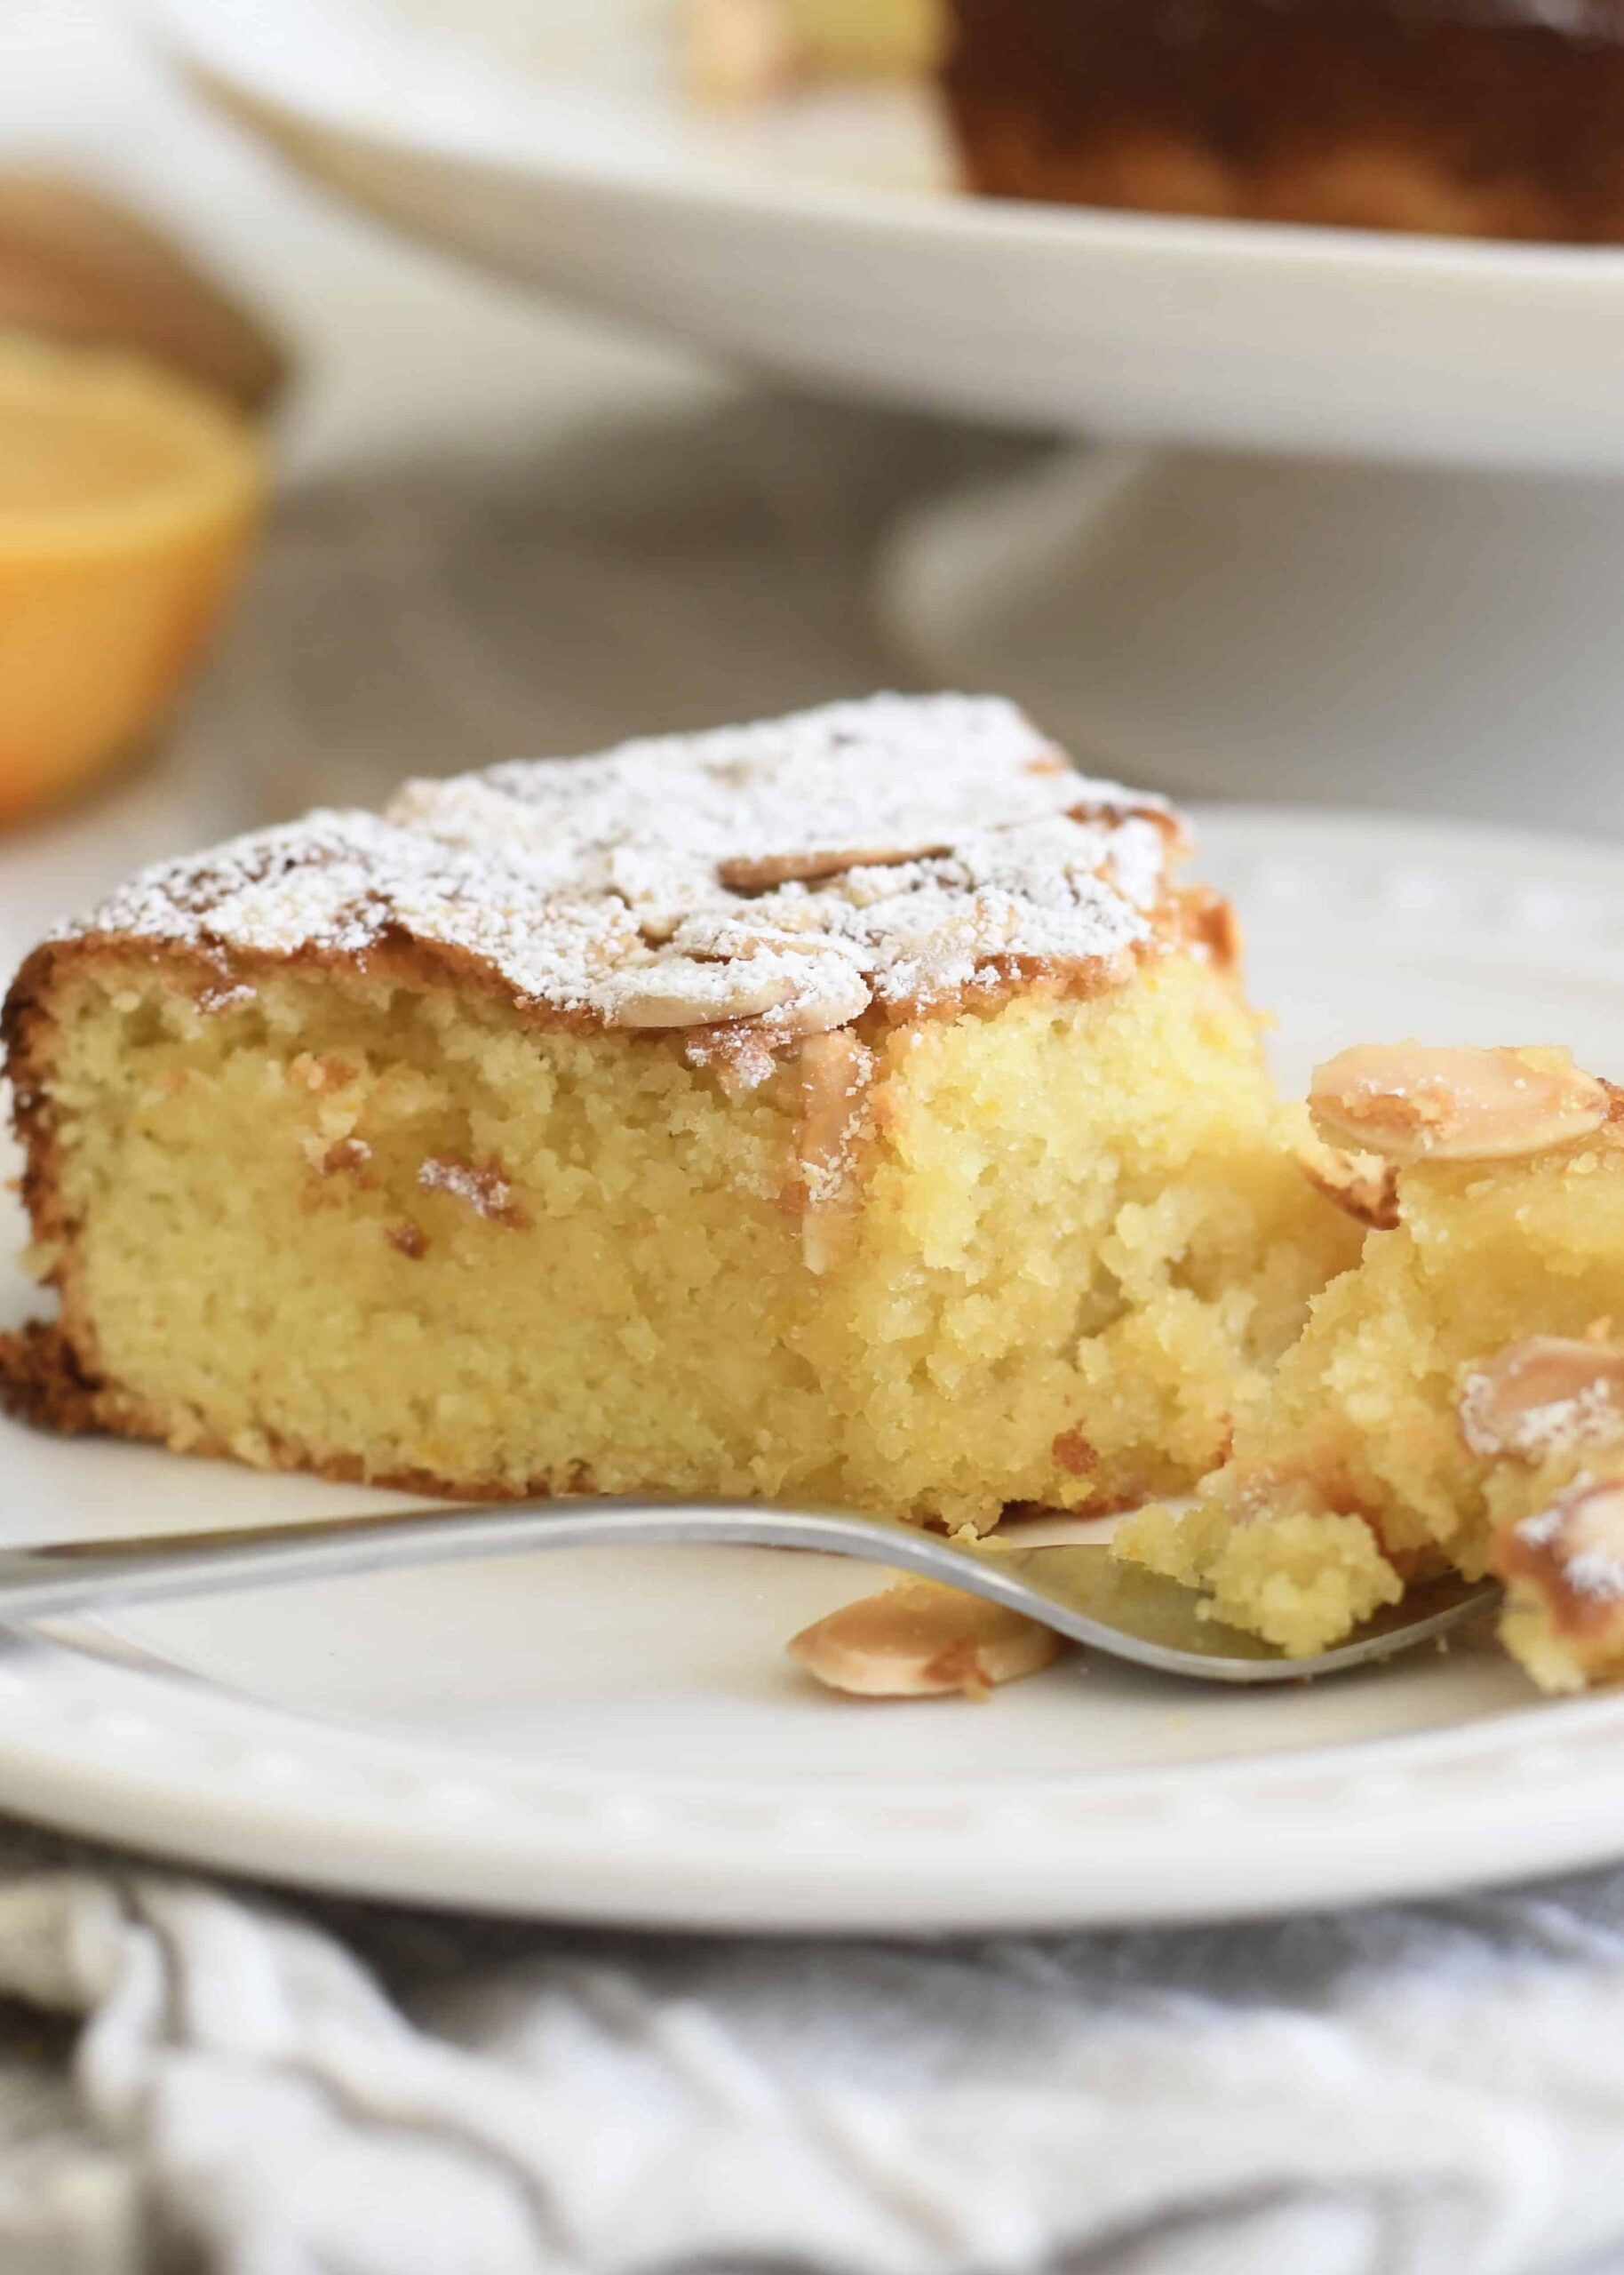  Citrusy and nutty notes in every bite: Orange and Almond Cake